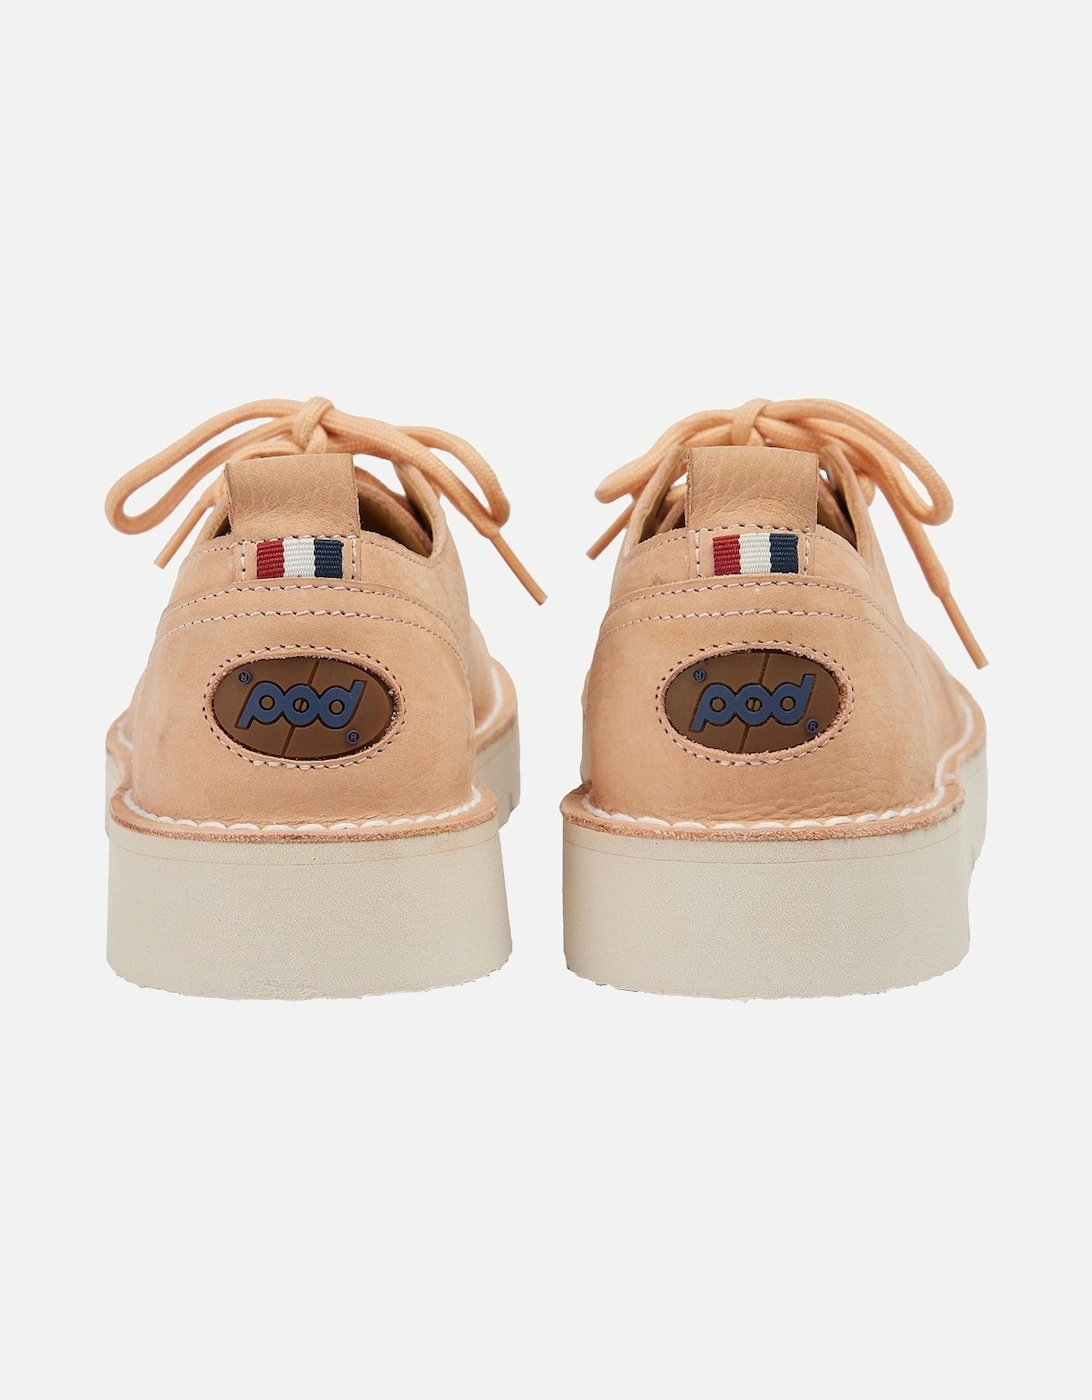 Dusty Womens Lace Up Moccasins